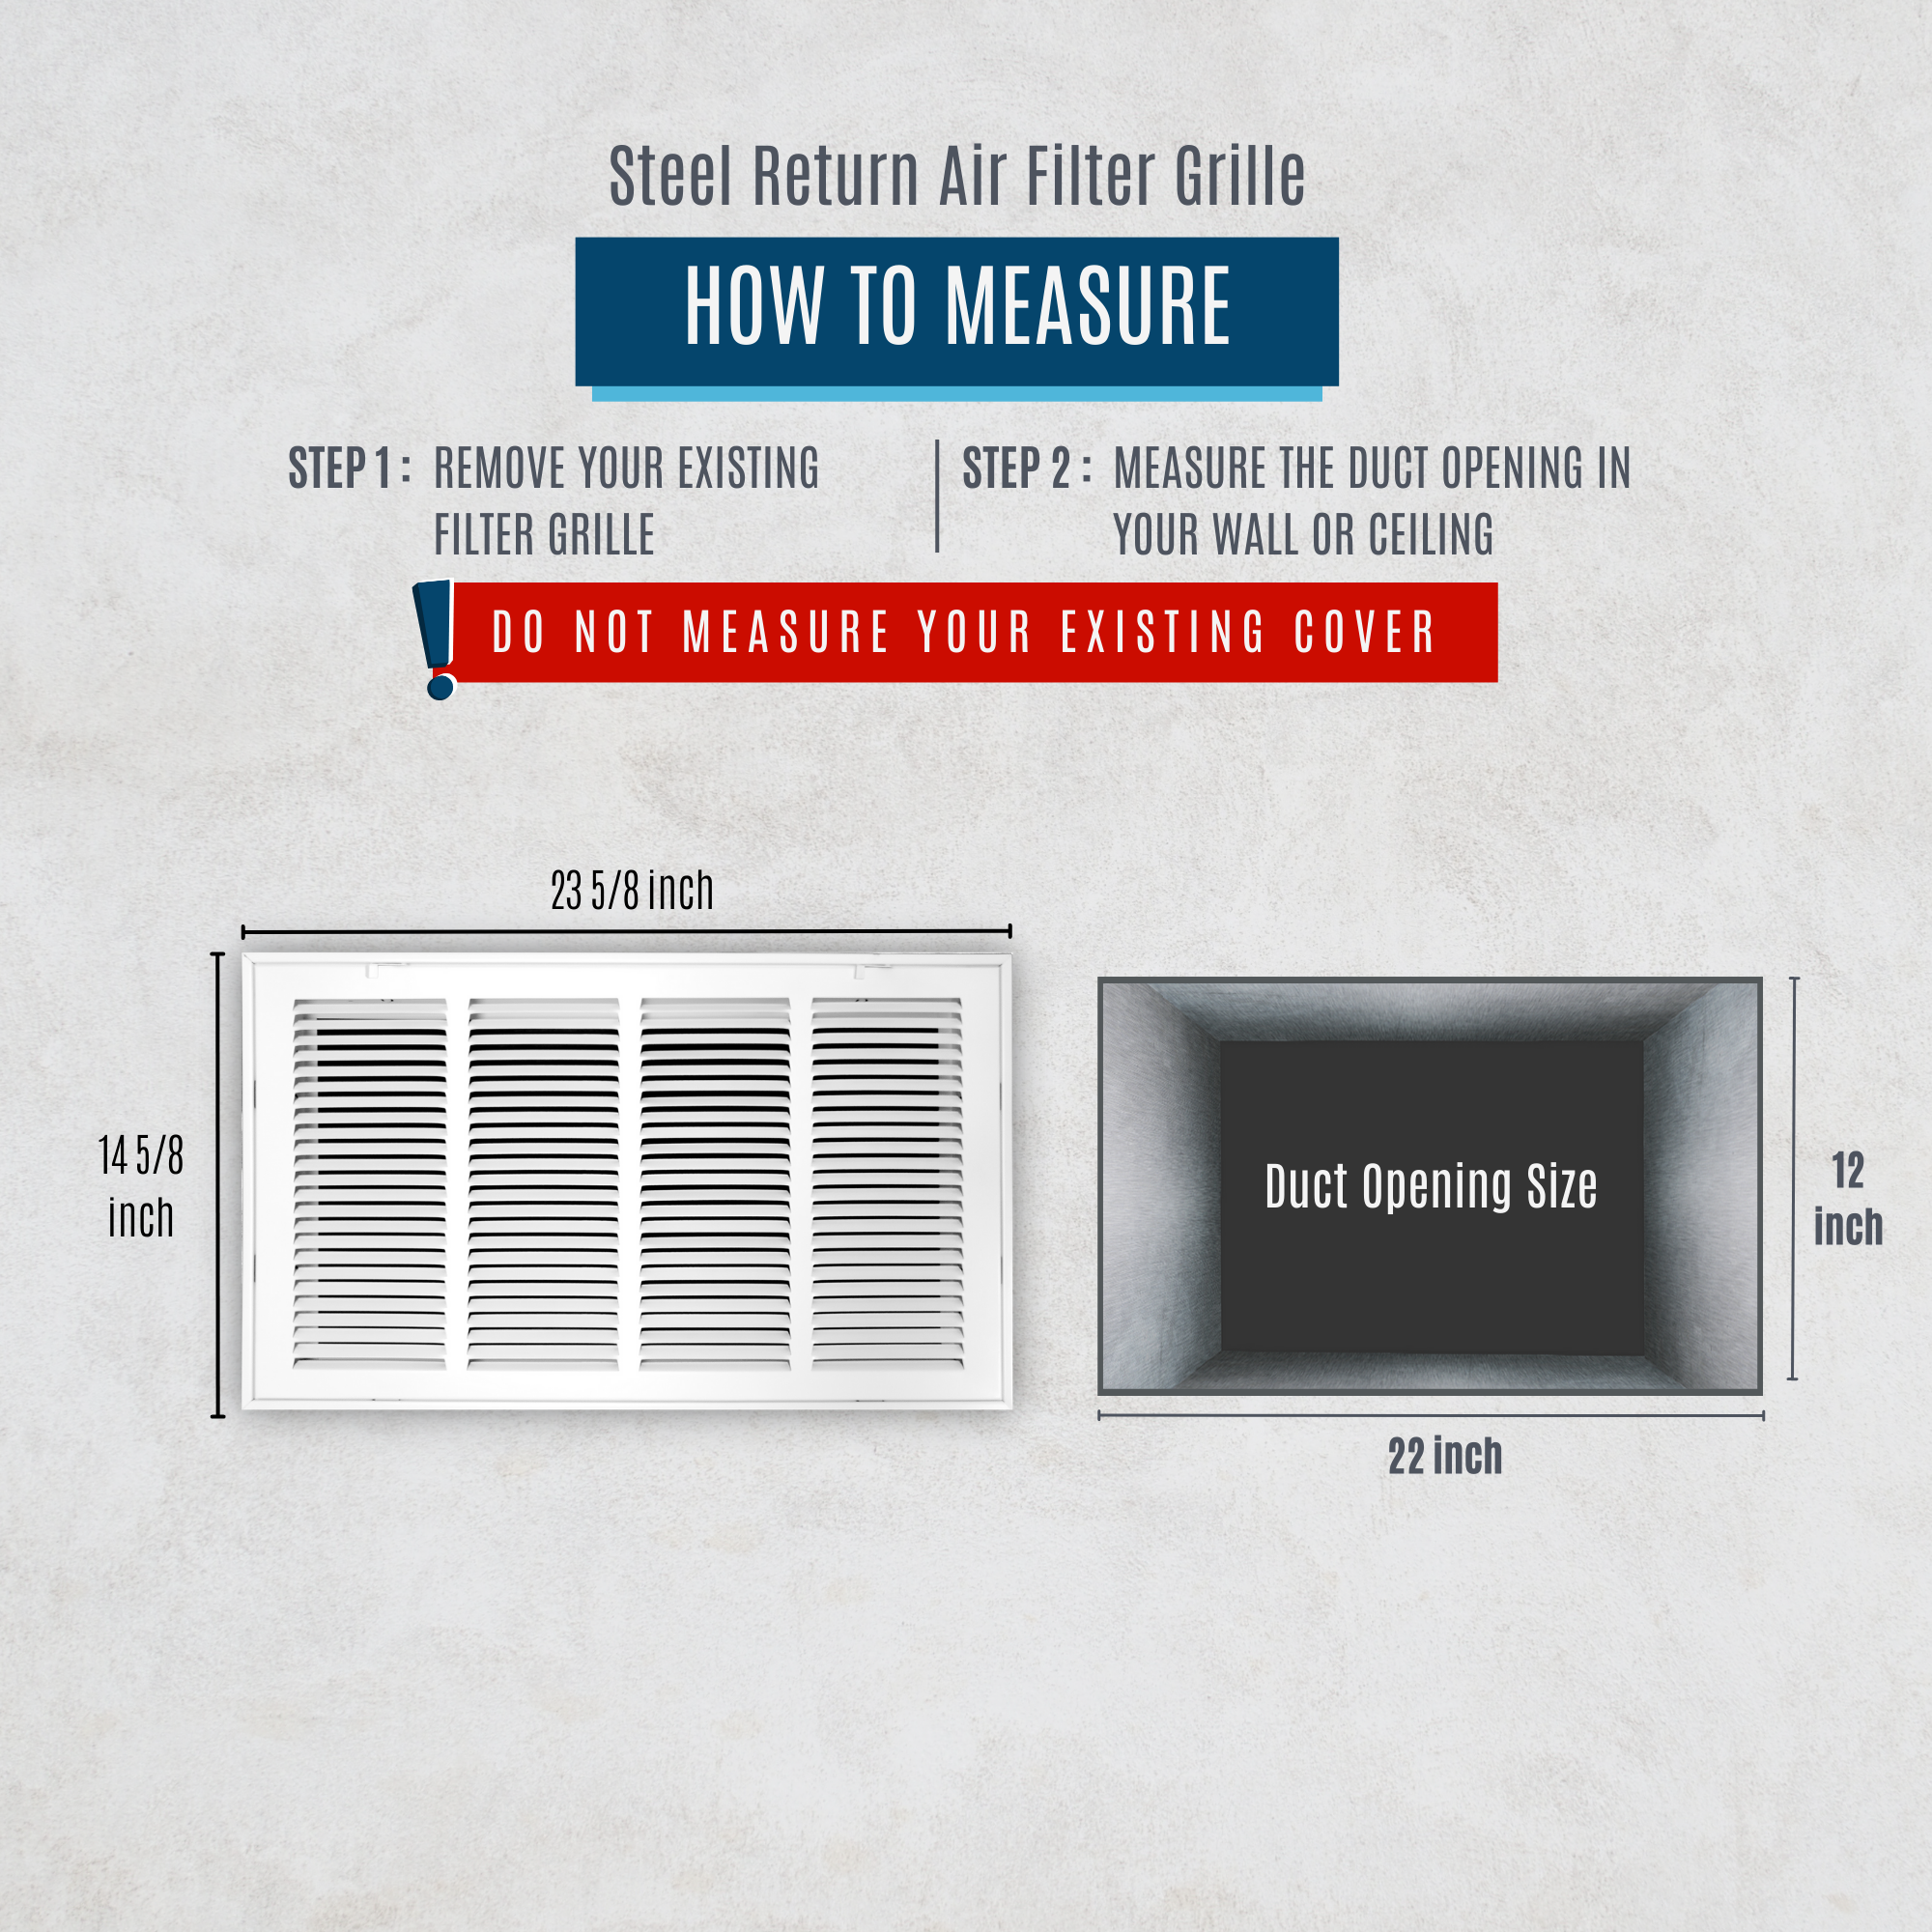 22" X 12" Duct Opening | Steel Return Air Filter Grille for Sidewall and Ceiling